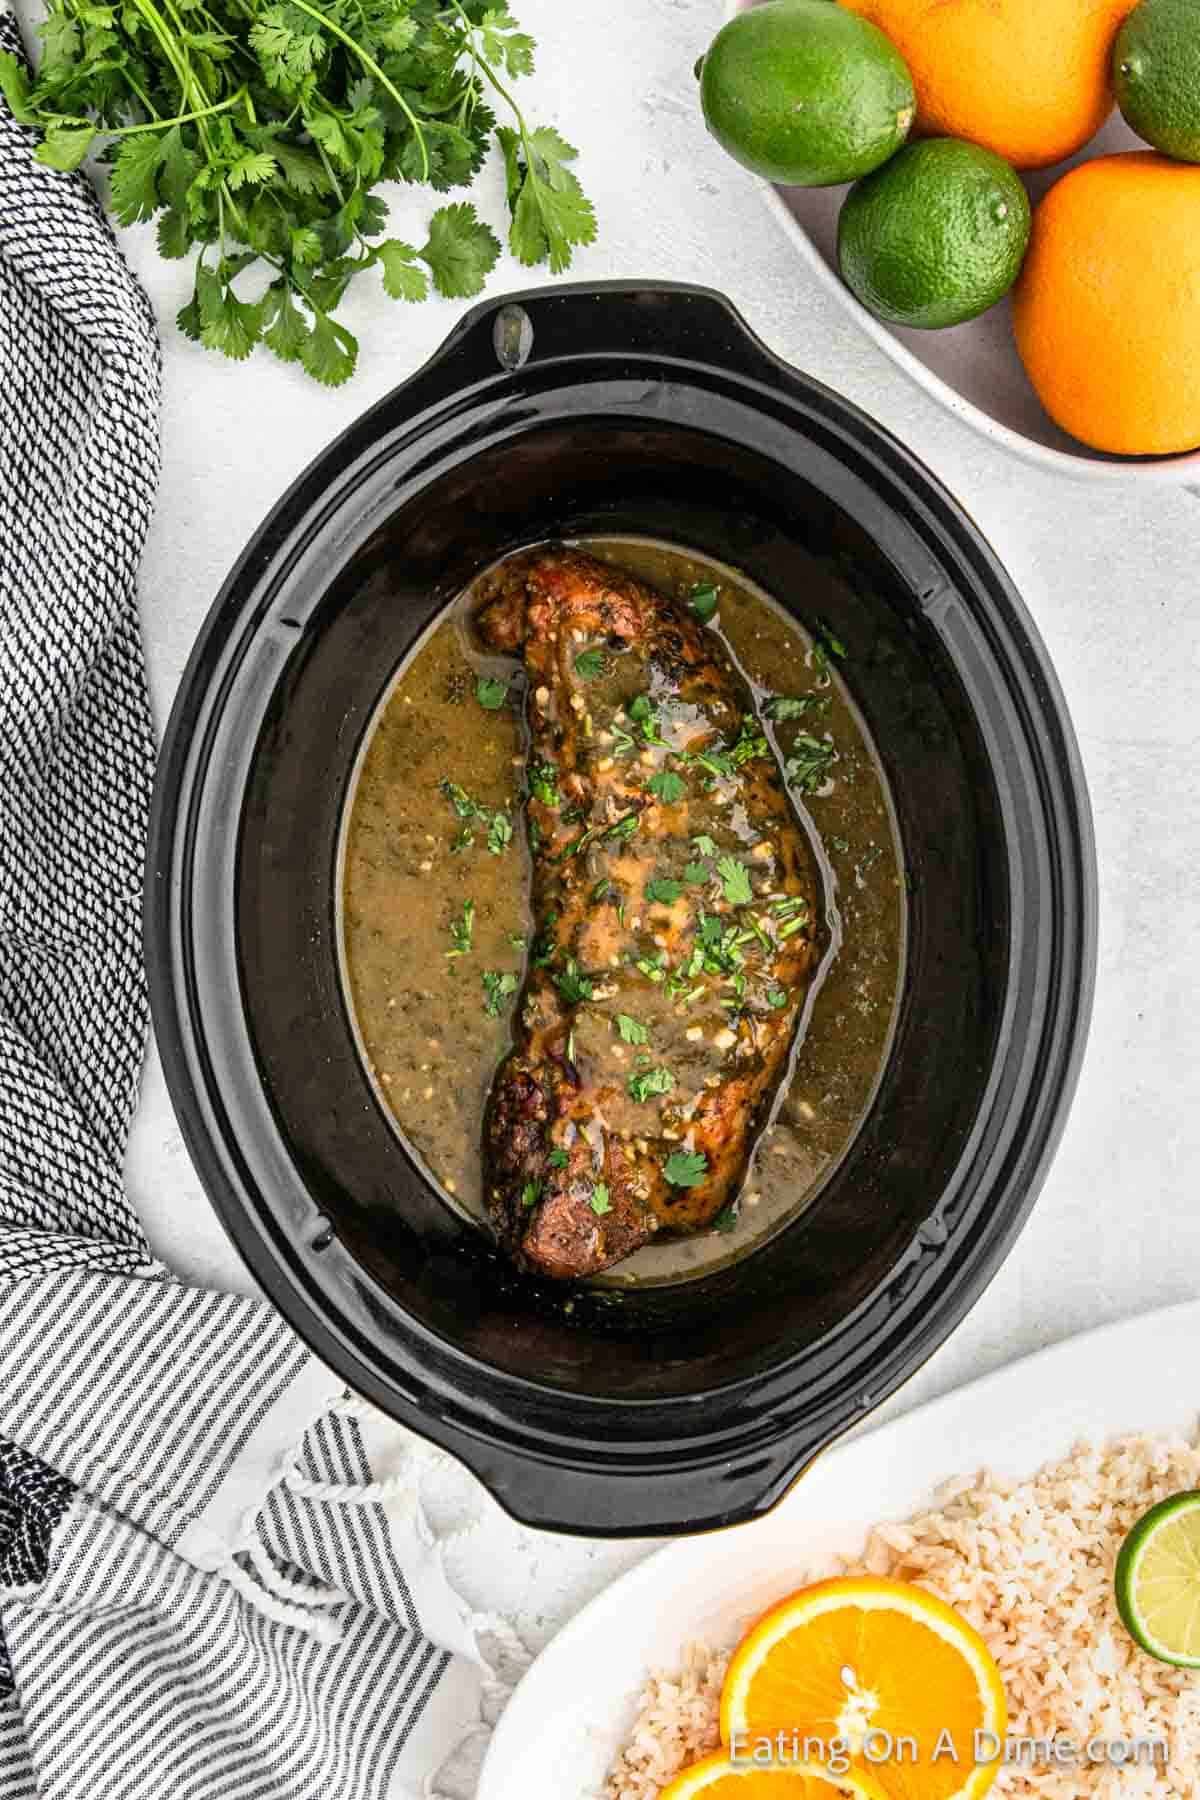 A cooked piece of meat with herbs and sauce is inside a black Crock Pot. Surrounding the slow cooker are a striped towel, a bunch of cilantro, a bowl of oranges and limes, and a plate of rice garnished with an orange slice, making it the perfect setting for a Cuban Mojo Pork Tenderloin recipe.